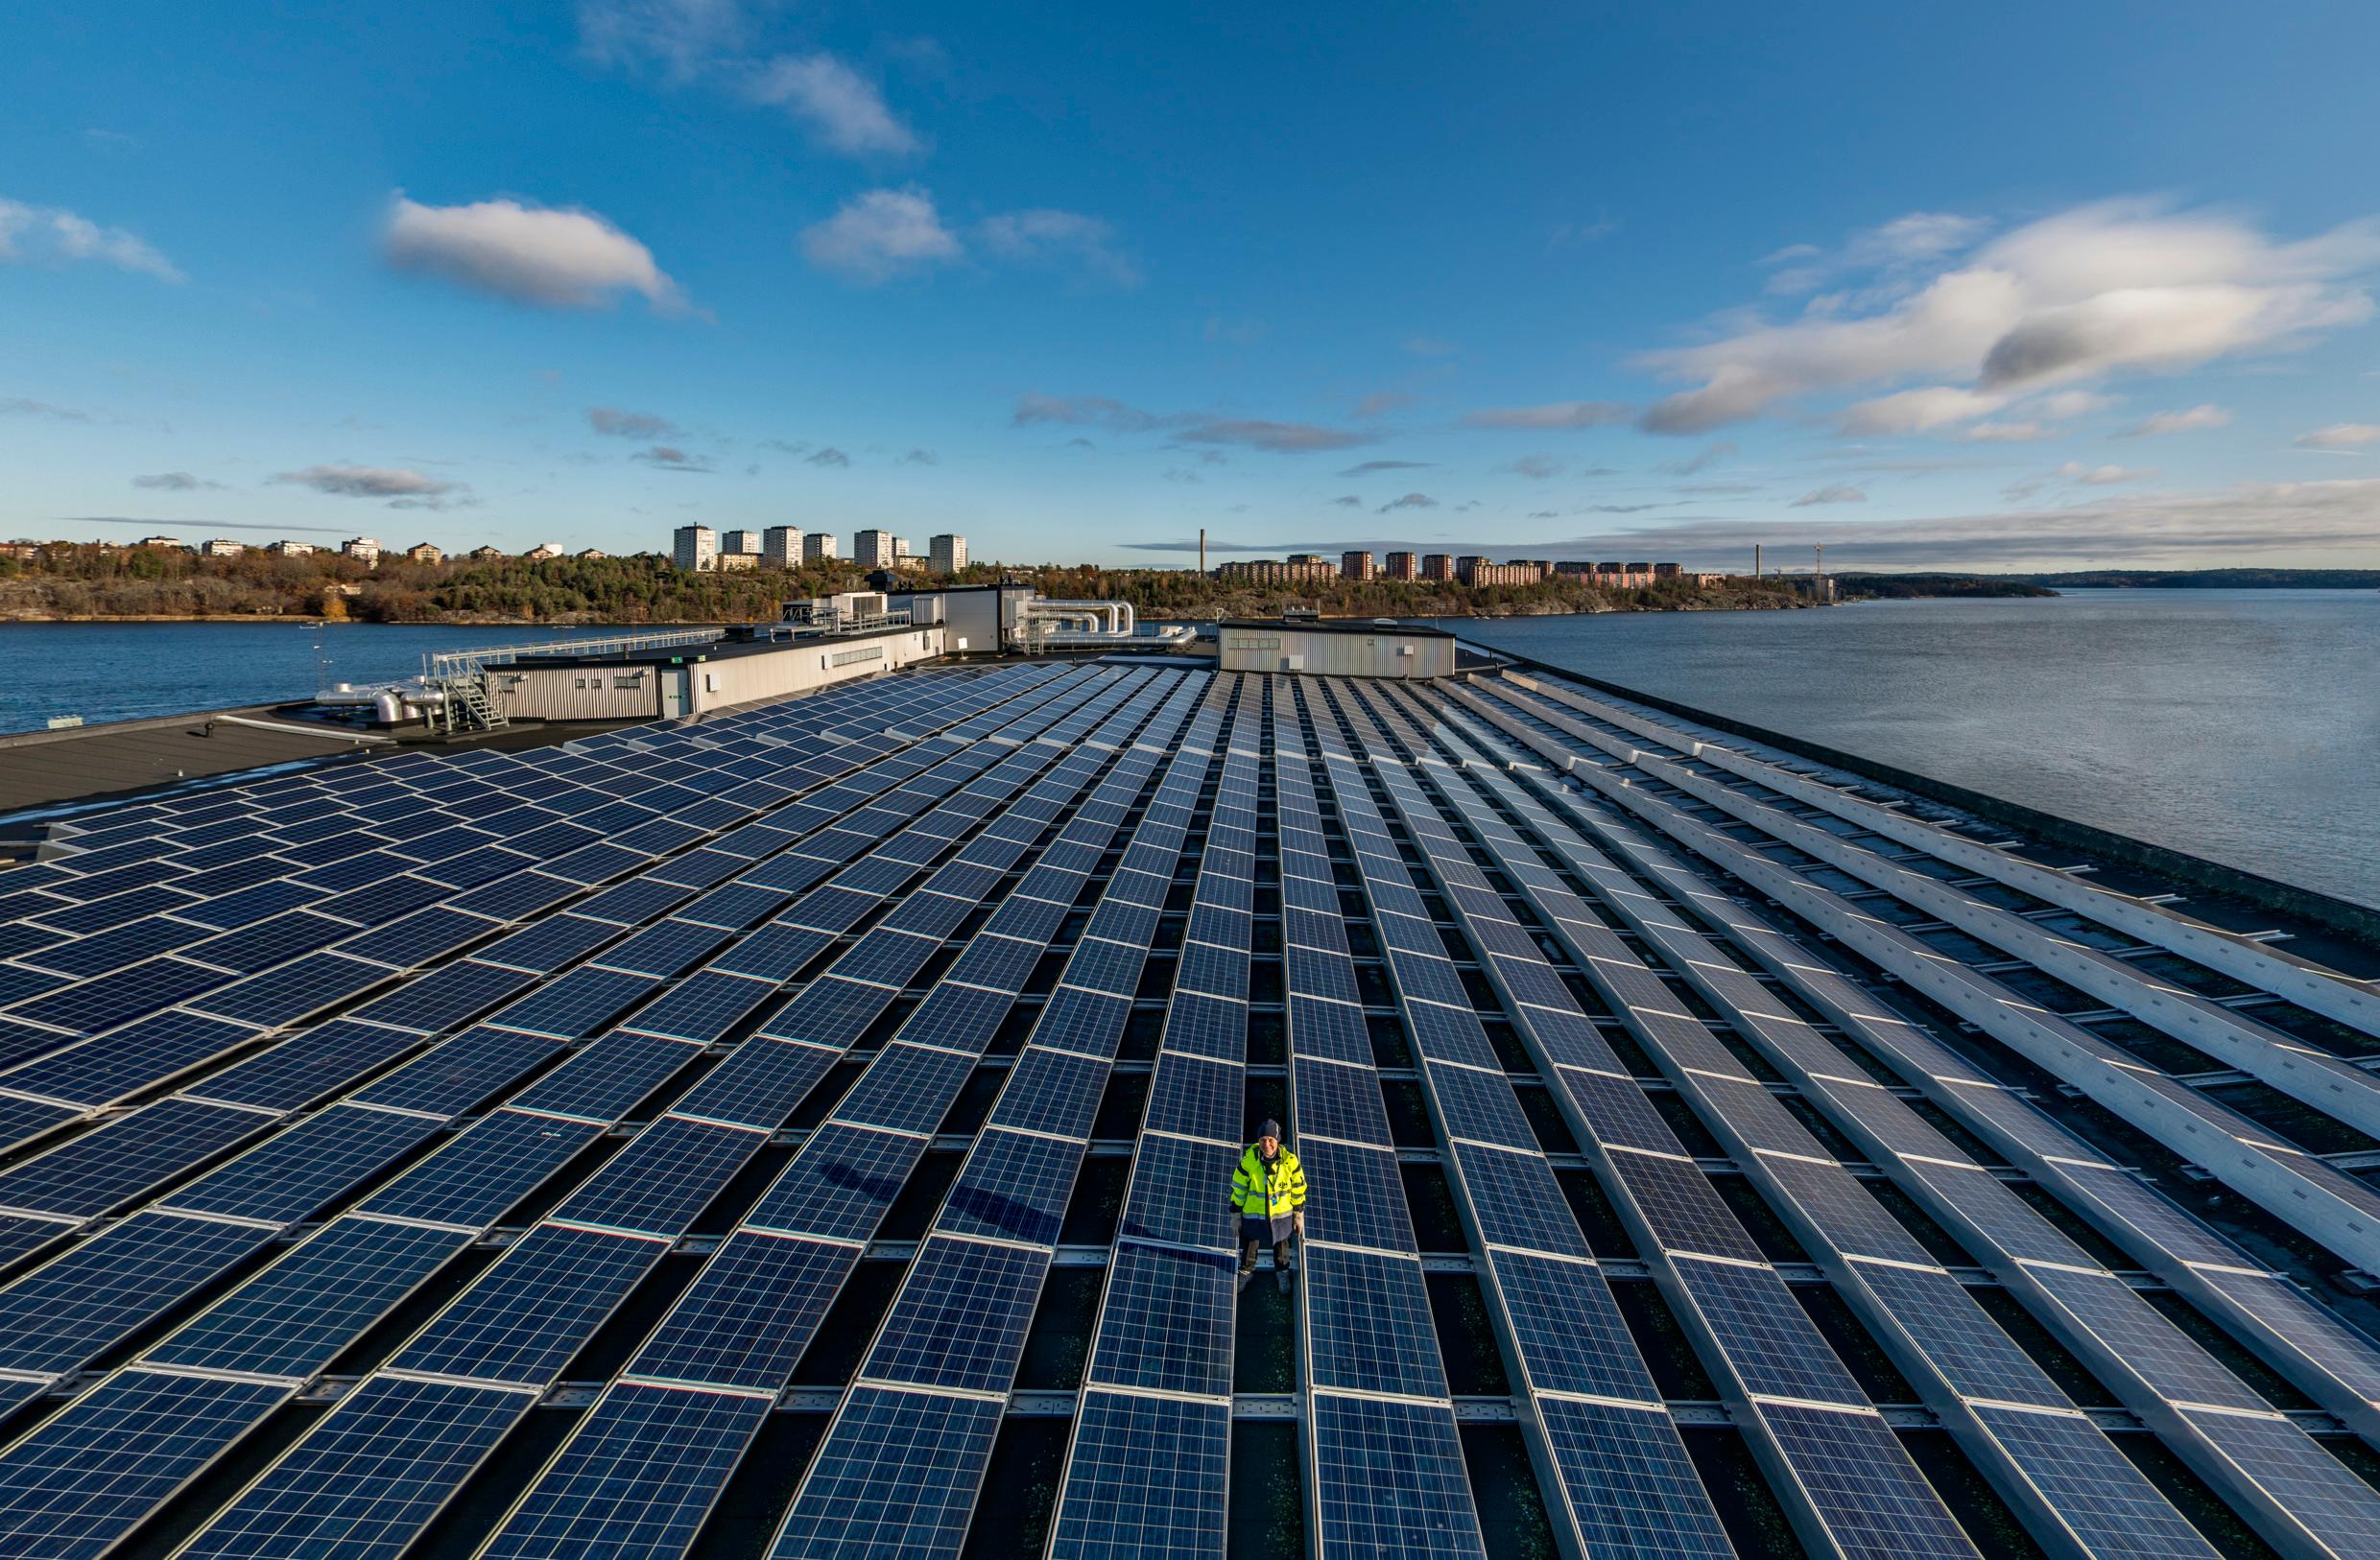 A huge rooftop solar energy facility with a large body of water and a city in the background.